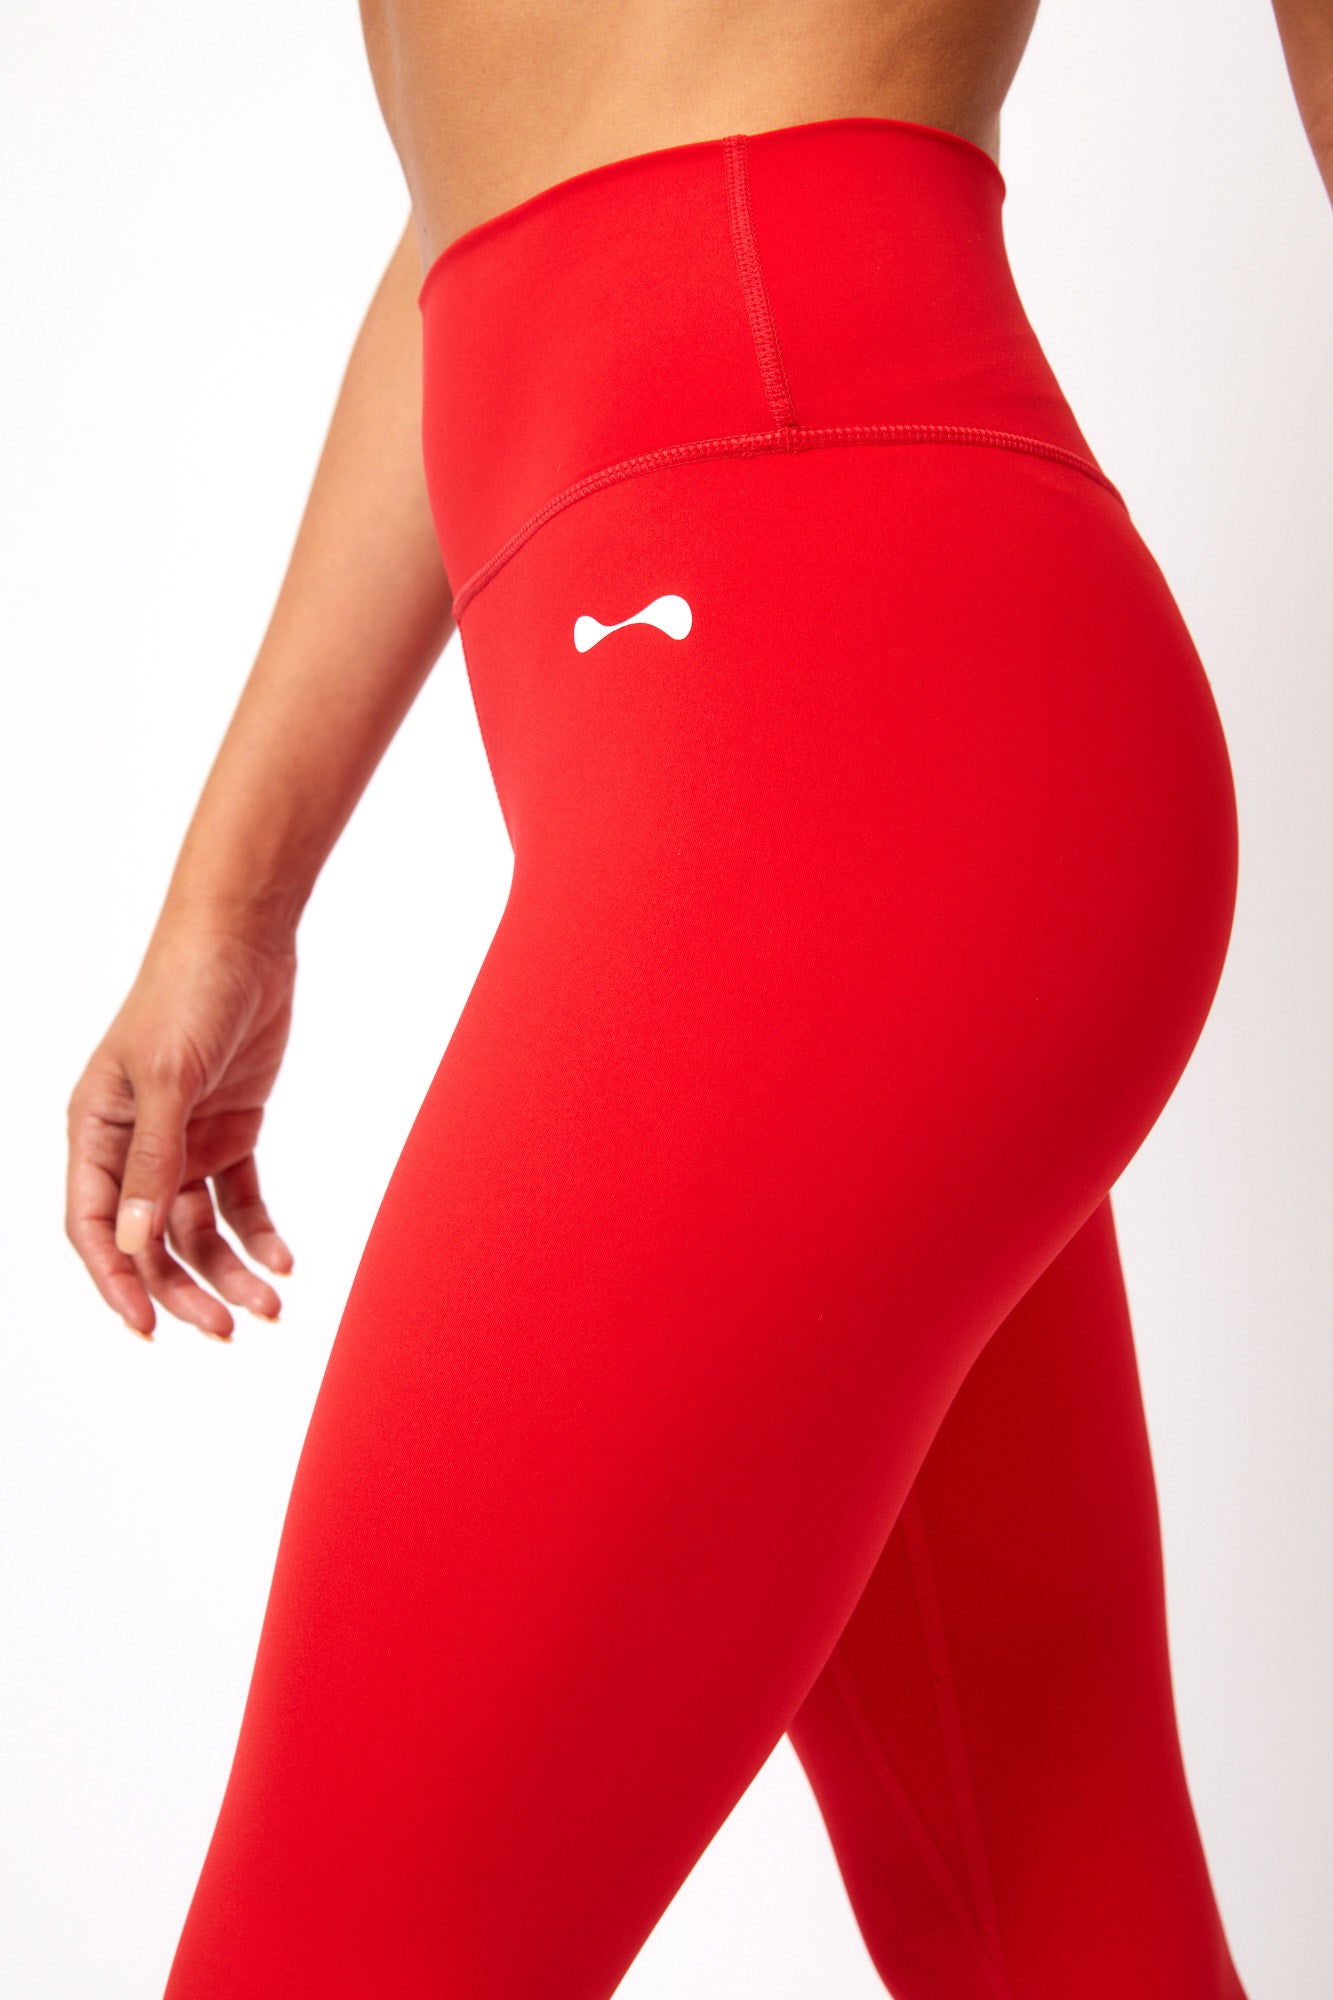 Redbat leggings from R179.95  Shop your work from home